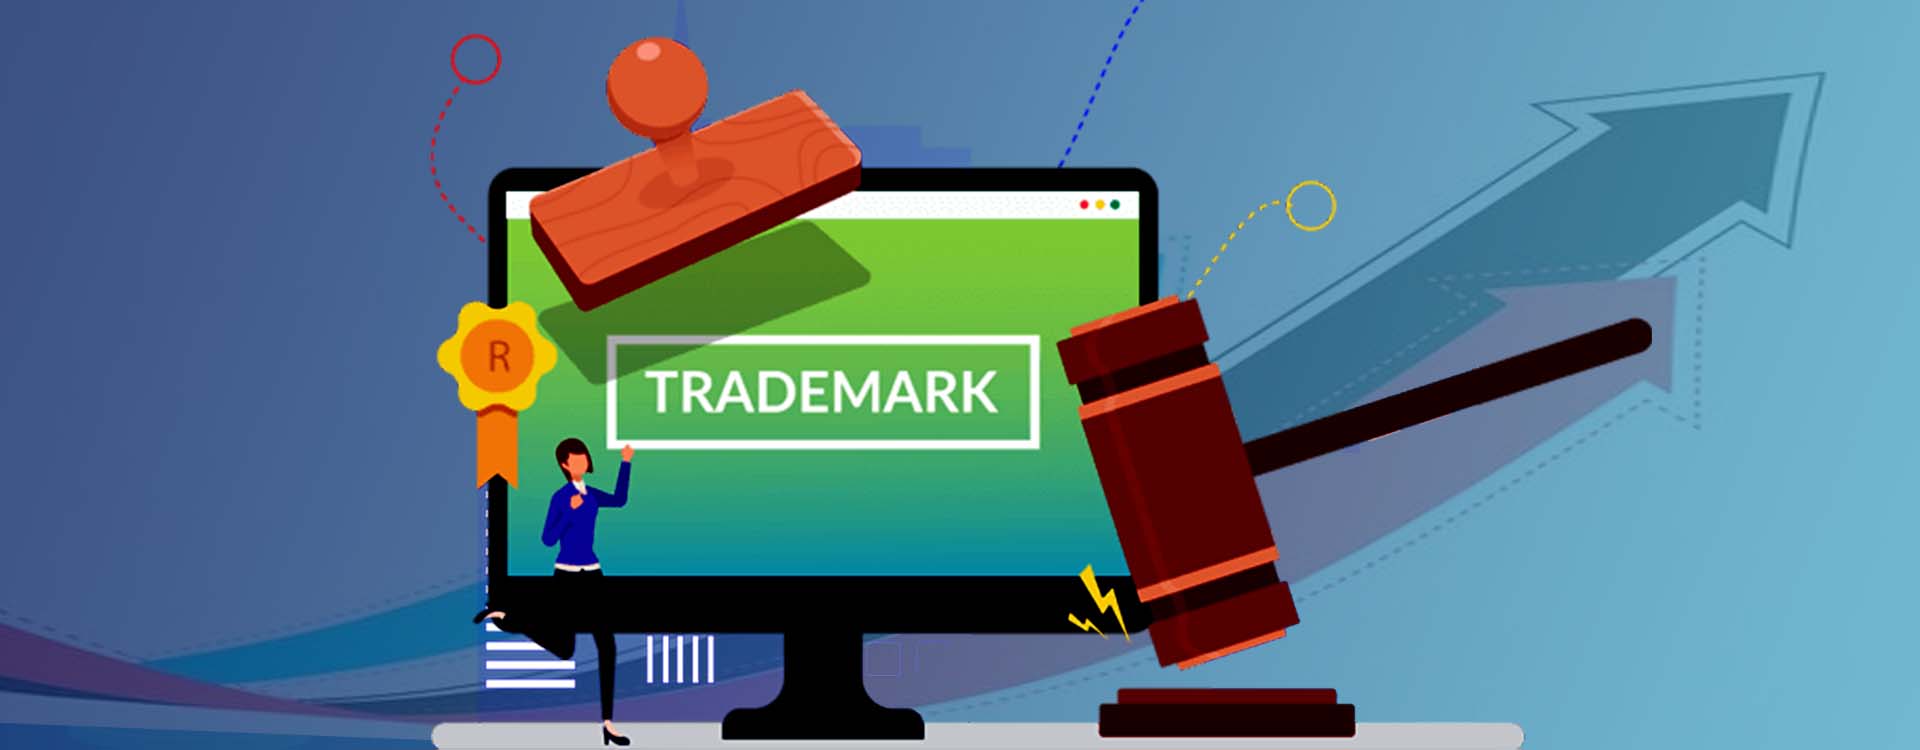 Patent And Trademark Registrations India